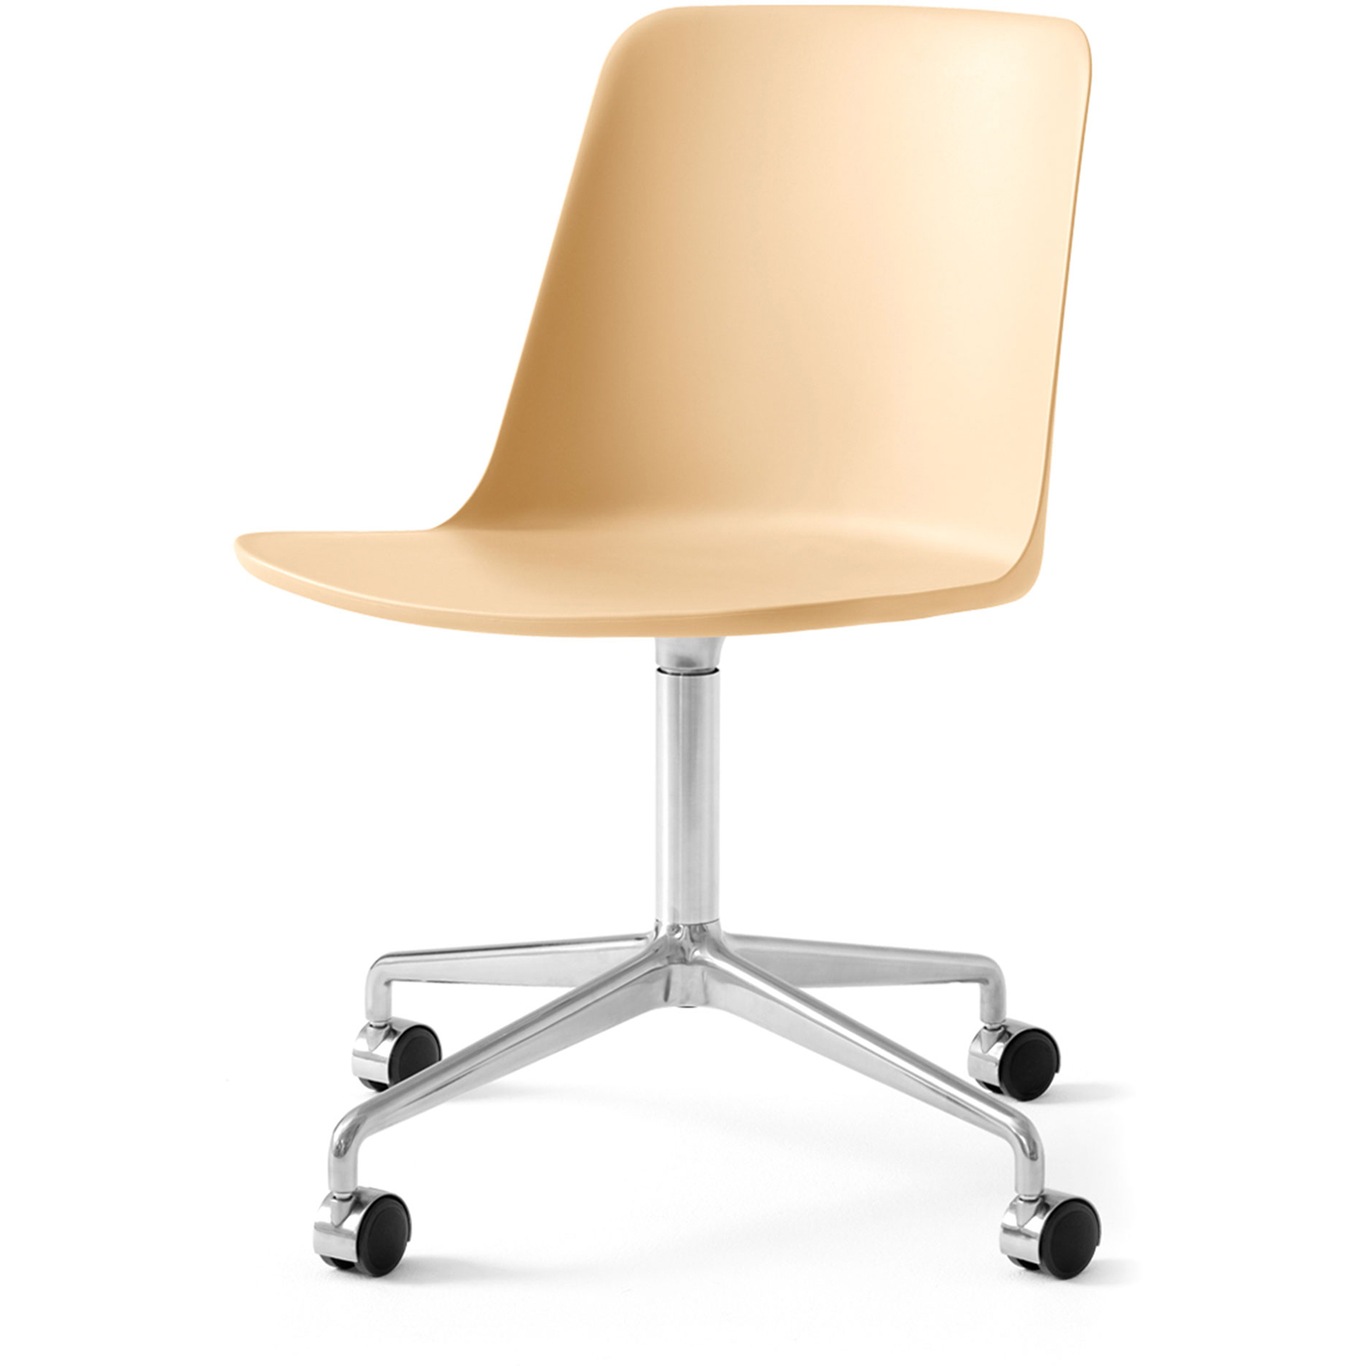 Rely Chair  HW21 Swivel, Polished Aluminium / Beige